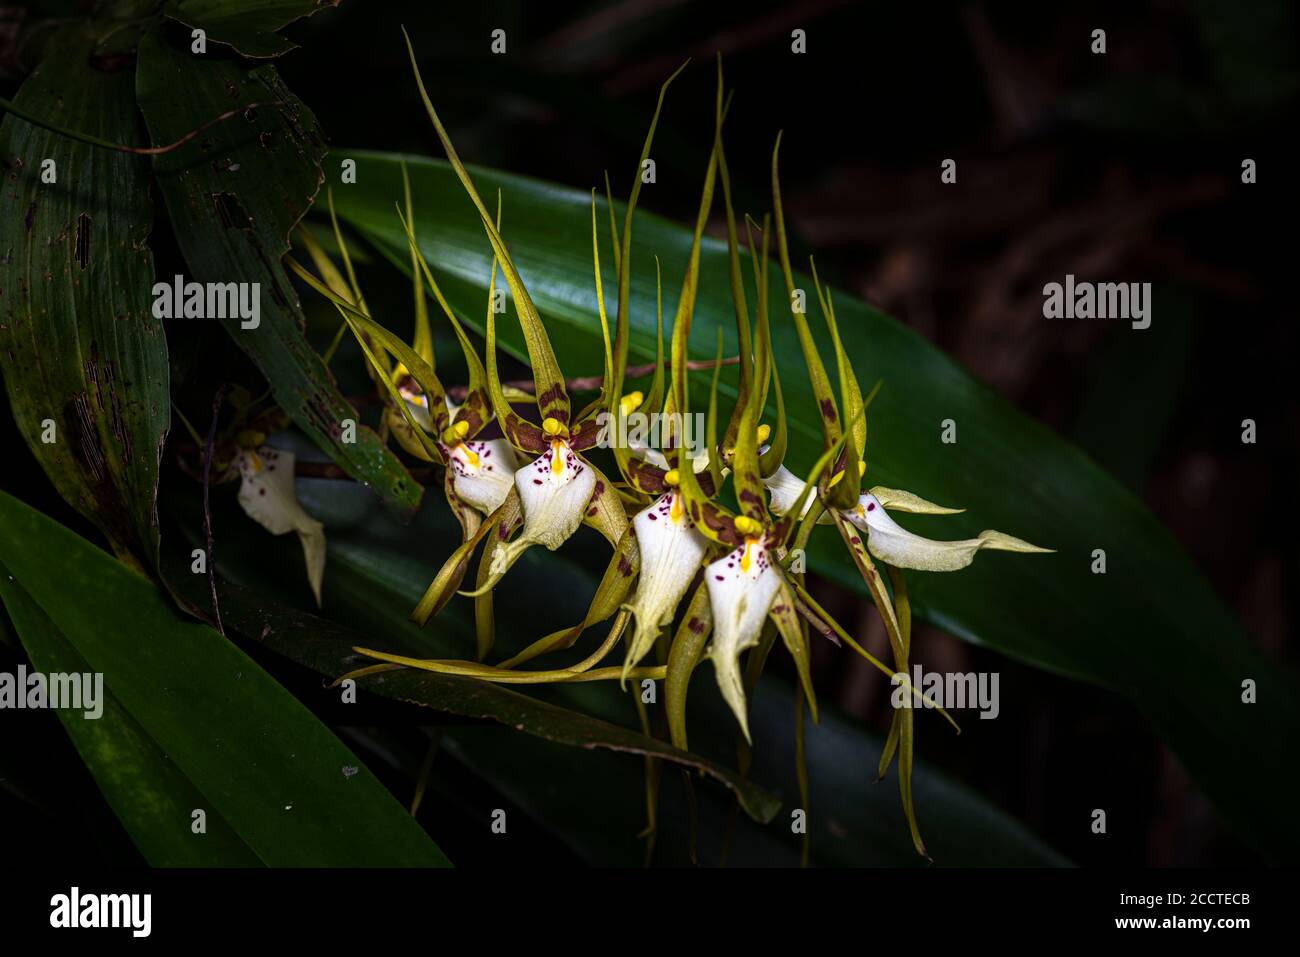 Spider orchid in natural environment image taken in the rain forest of Panama Stock Photo